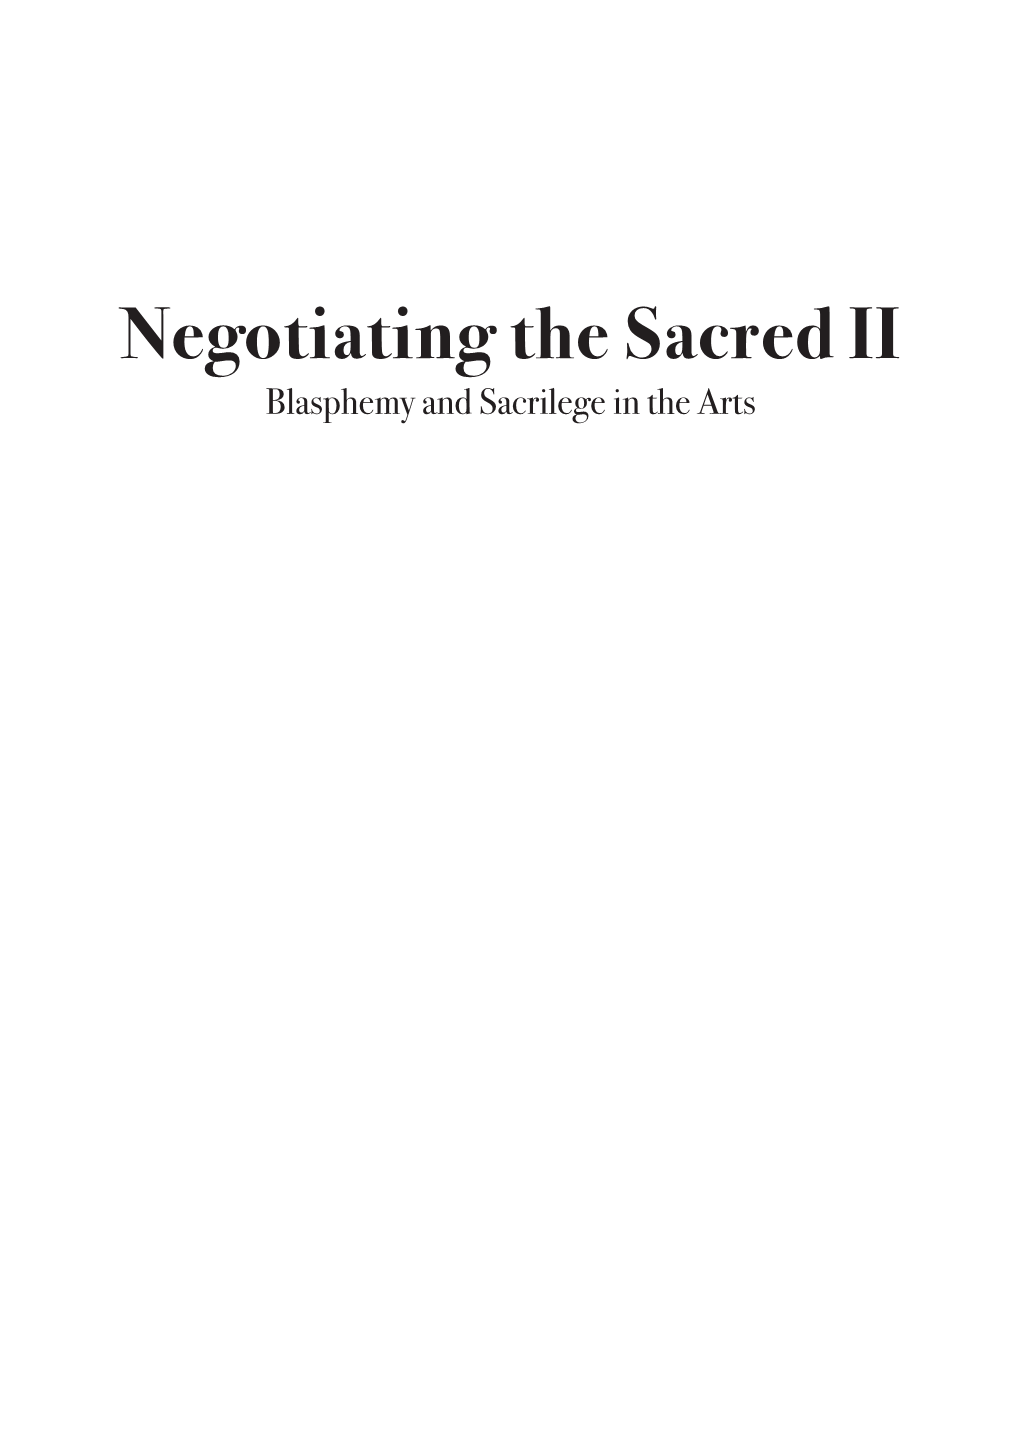 Negotiating the Sacred II Blasphemy and Sacrilege in the Arts